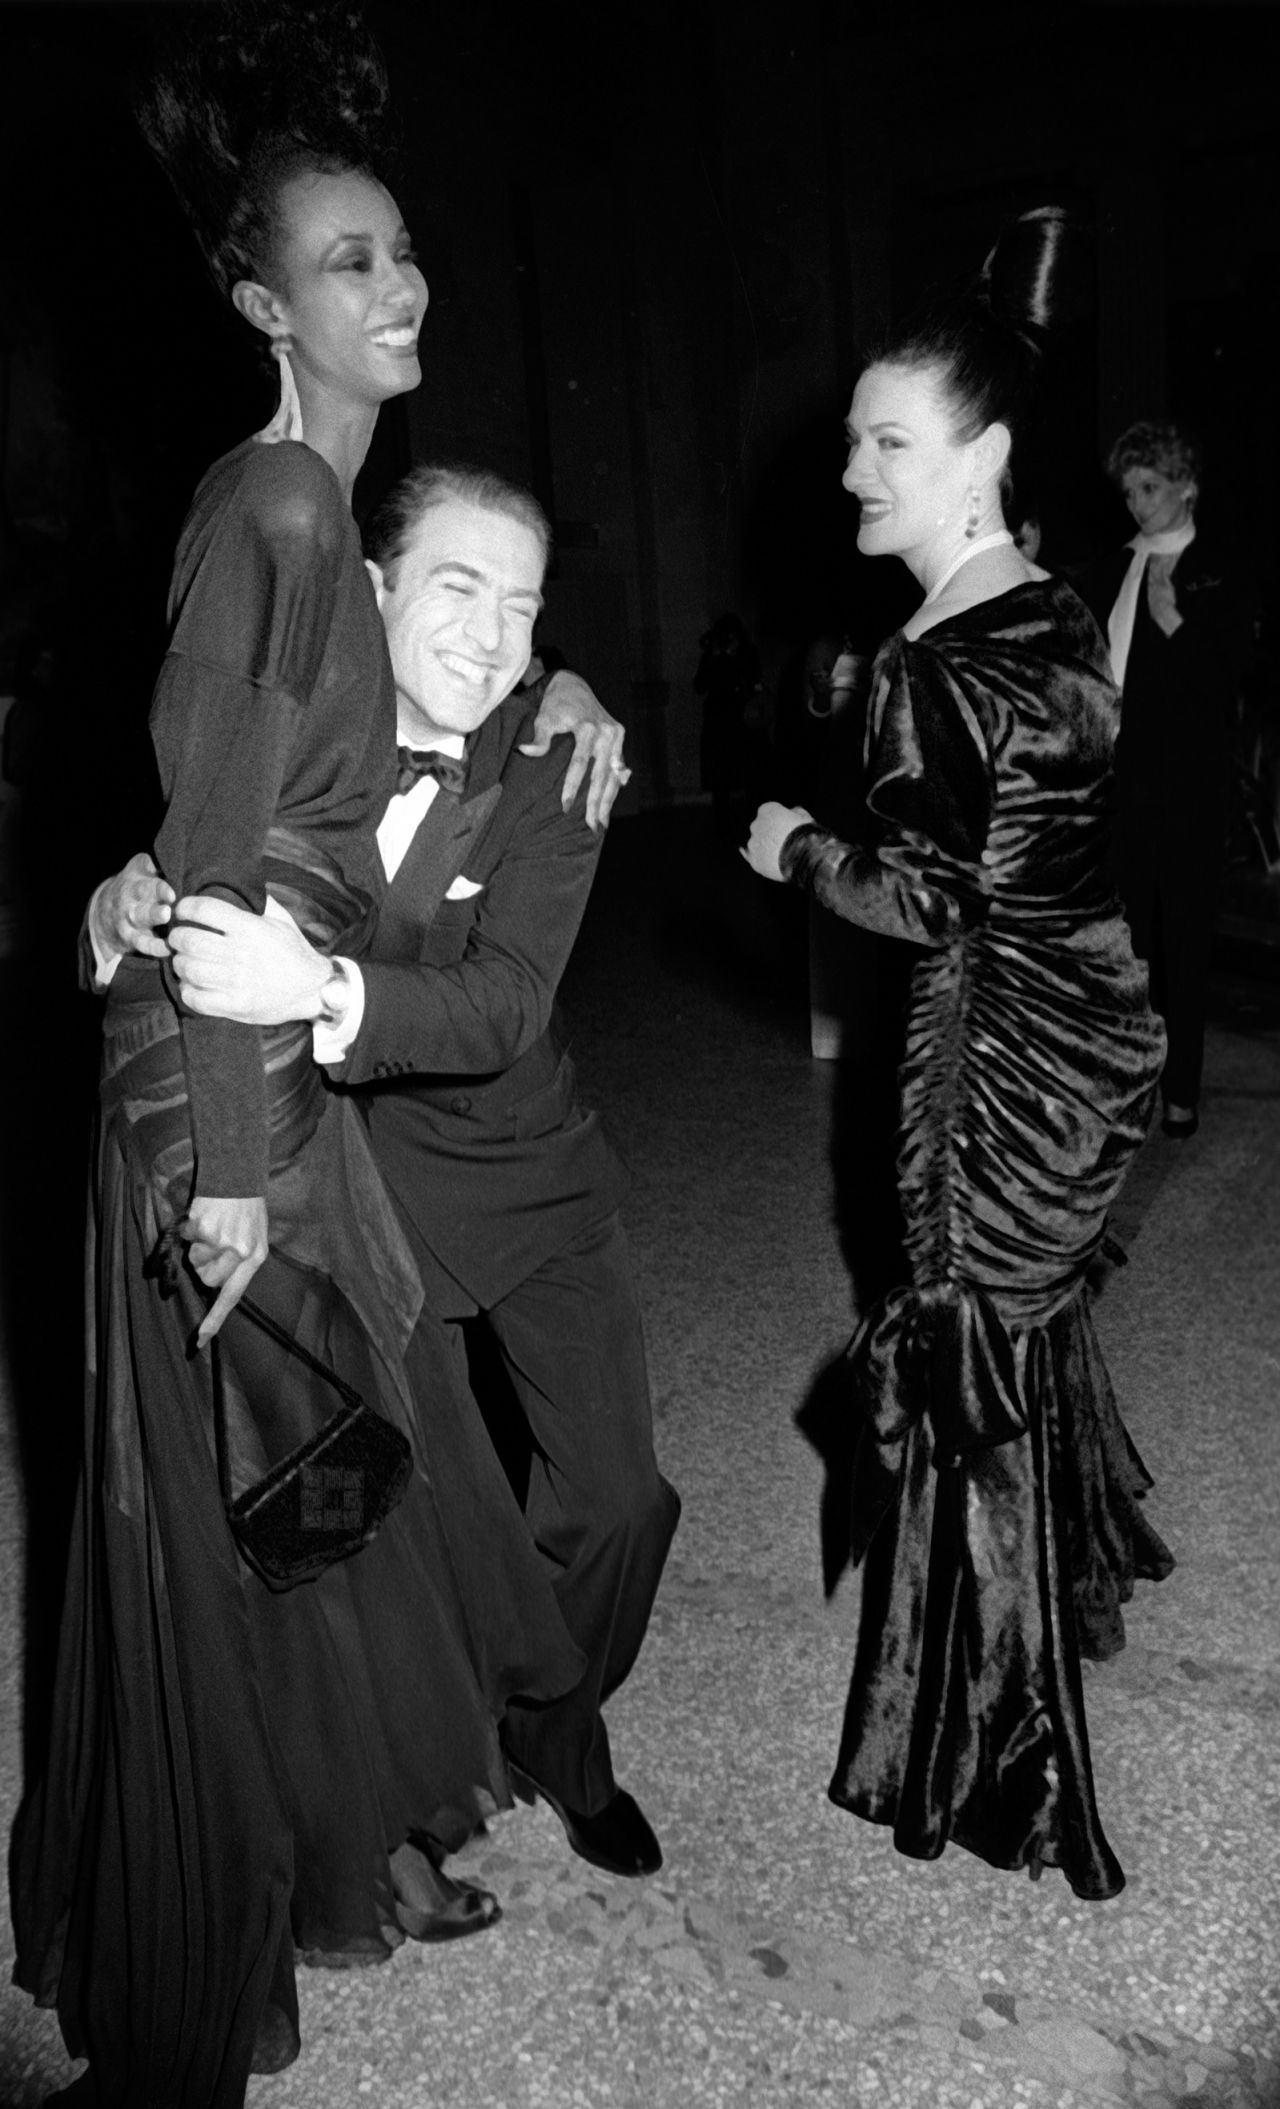 Ron Galella snapped this light moment of Iman, Paloma Picasso and Raphael Lopez Sanchez at the 1983 Met Gala, which honored the work of Yves St. Laurent.